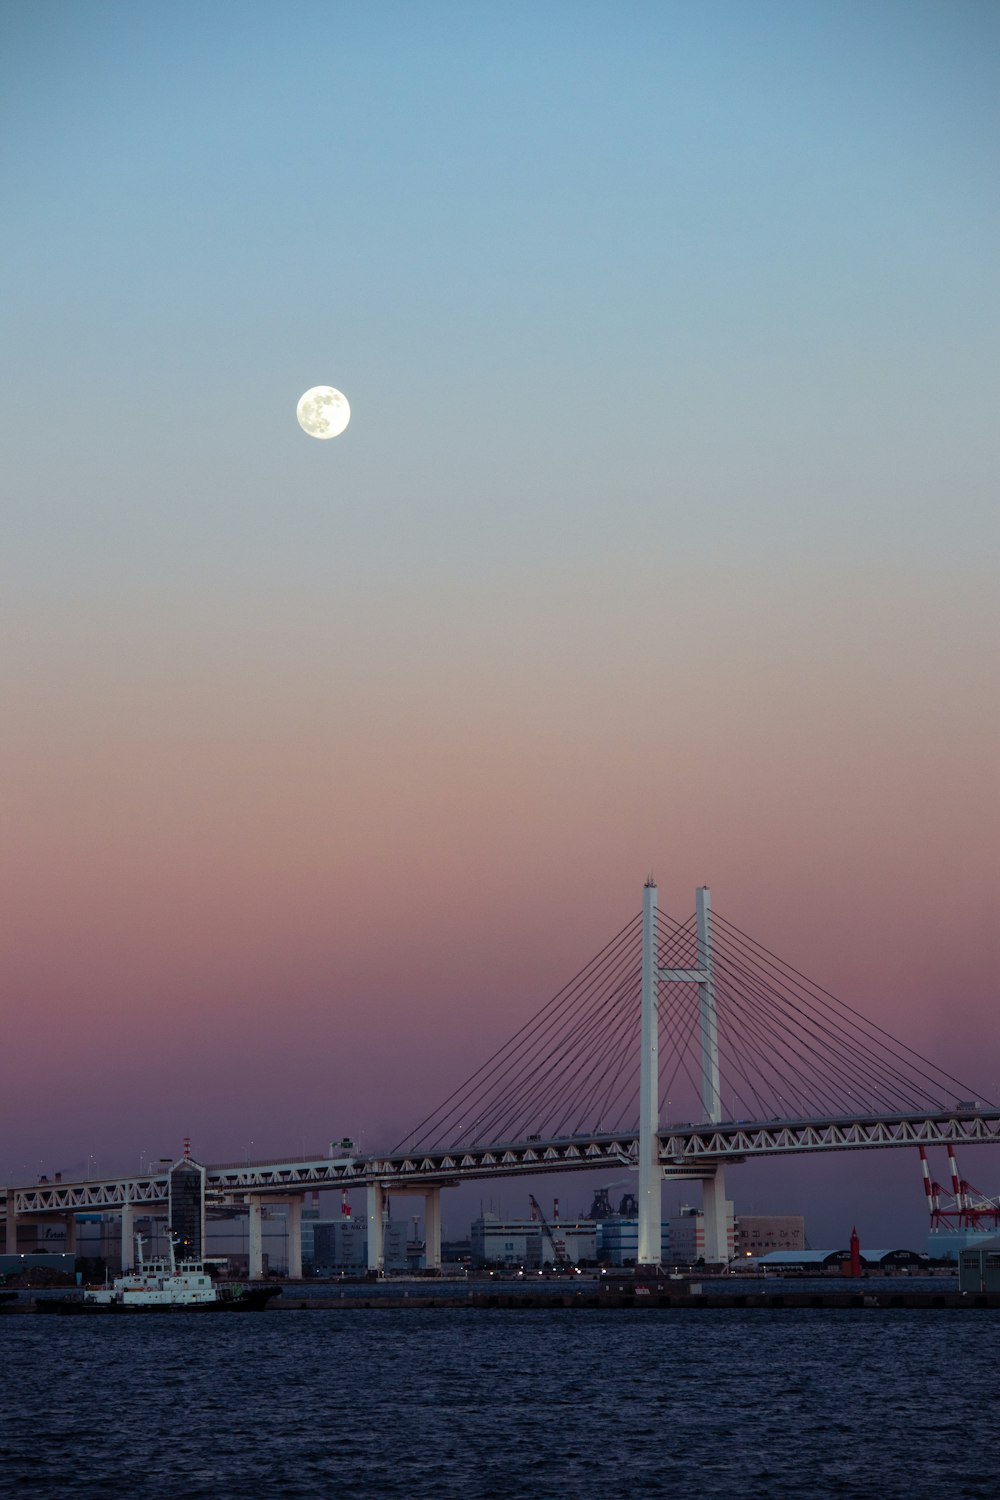 a full moon rising over a bridge over a body of water